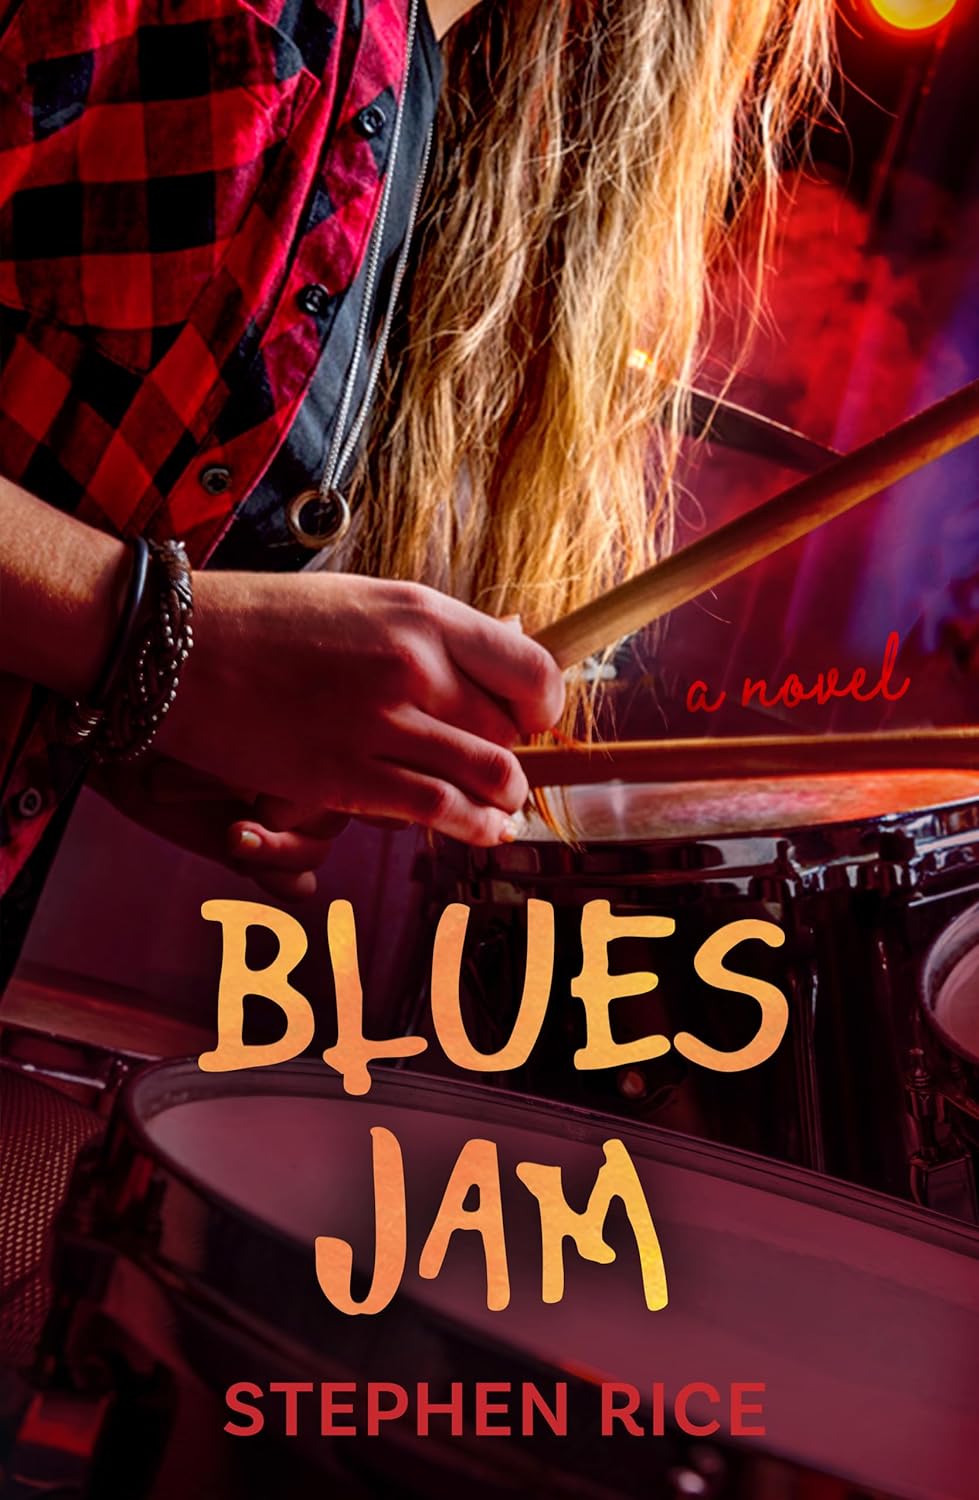 New novel "Blues Jam" by Stephen Rice is released, a character driven story about growing up, relationships, struggles with addiction, and the power of music